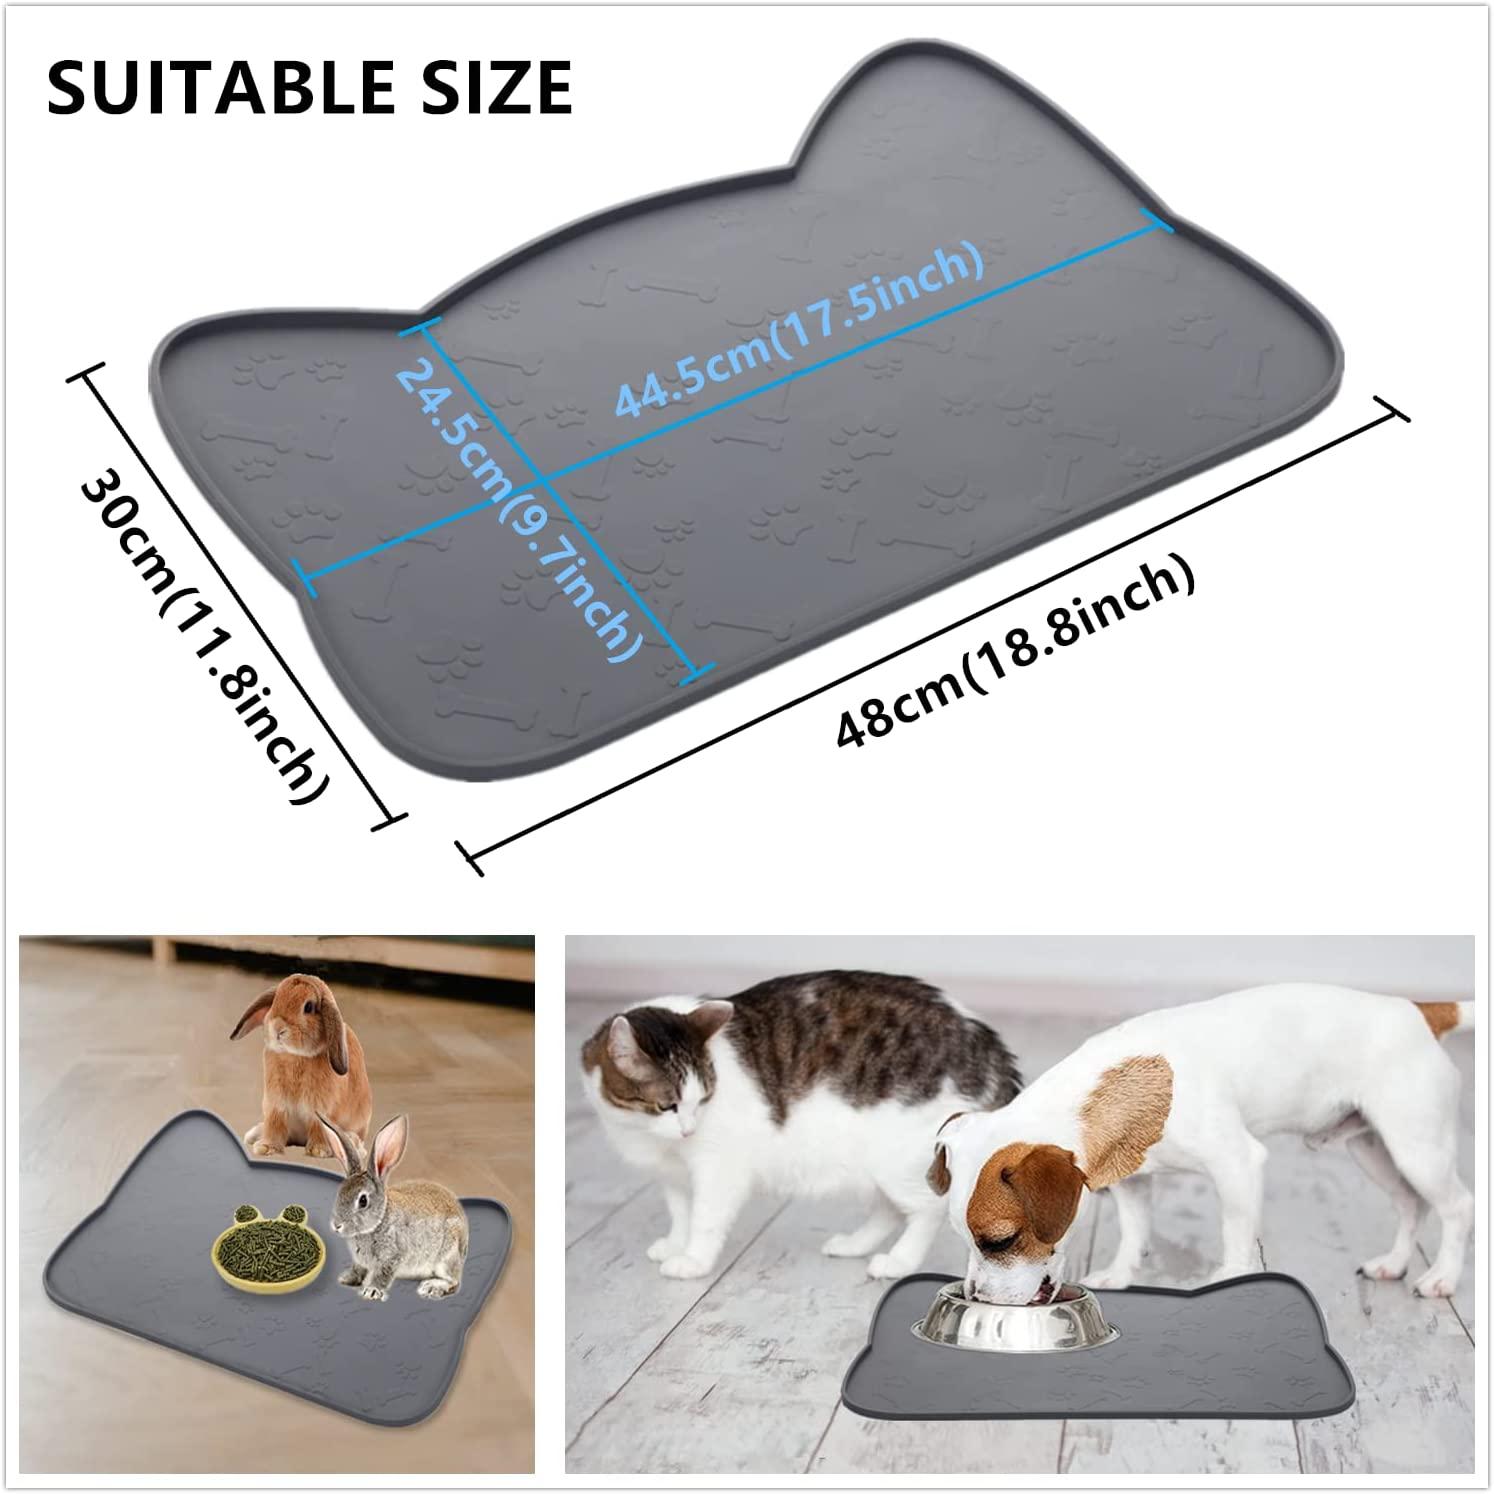 IYYI Cat Food Mat, Silicone Dog Bowl Mat for Food and Water